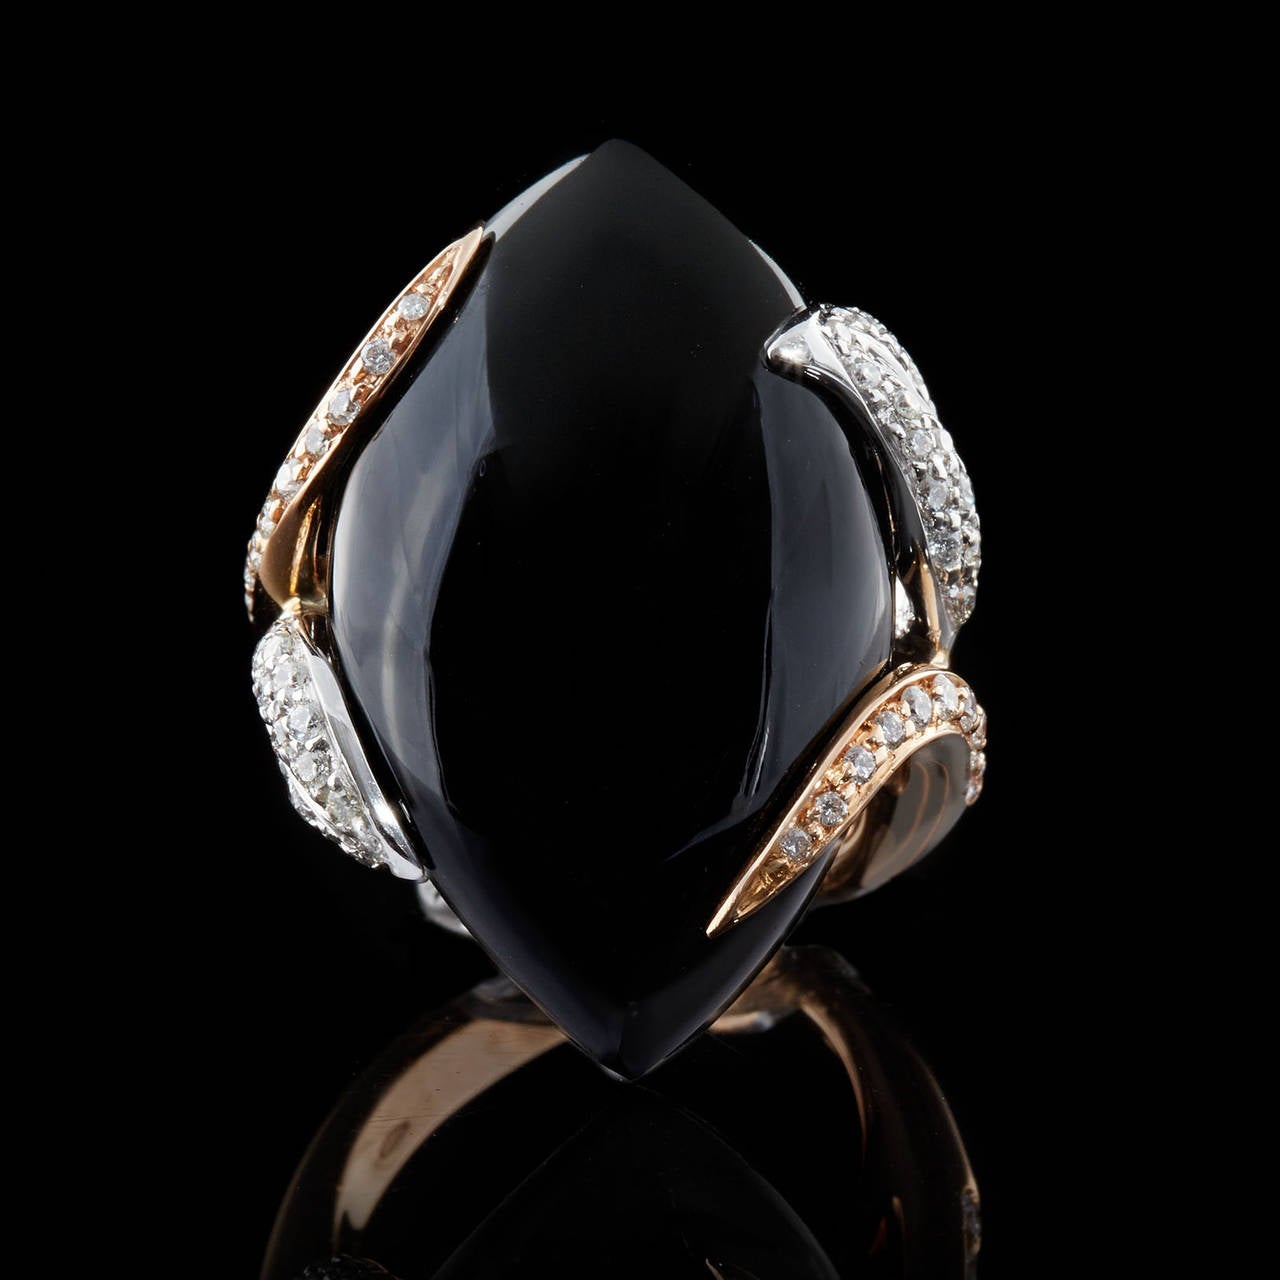 Luca Carati 18Kt Rose Gold Ring features a bold 29.5 carat Onyx polished & cut in a Navette shape. Detailed on the 4 leaf & vine design prongs are round brilliant diamonds totaling 0.52 carats with F-G color & VS clarity. The measurements of the